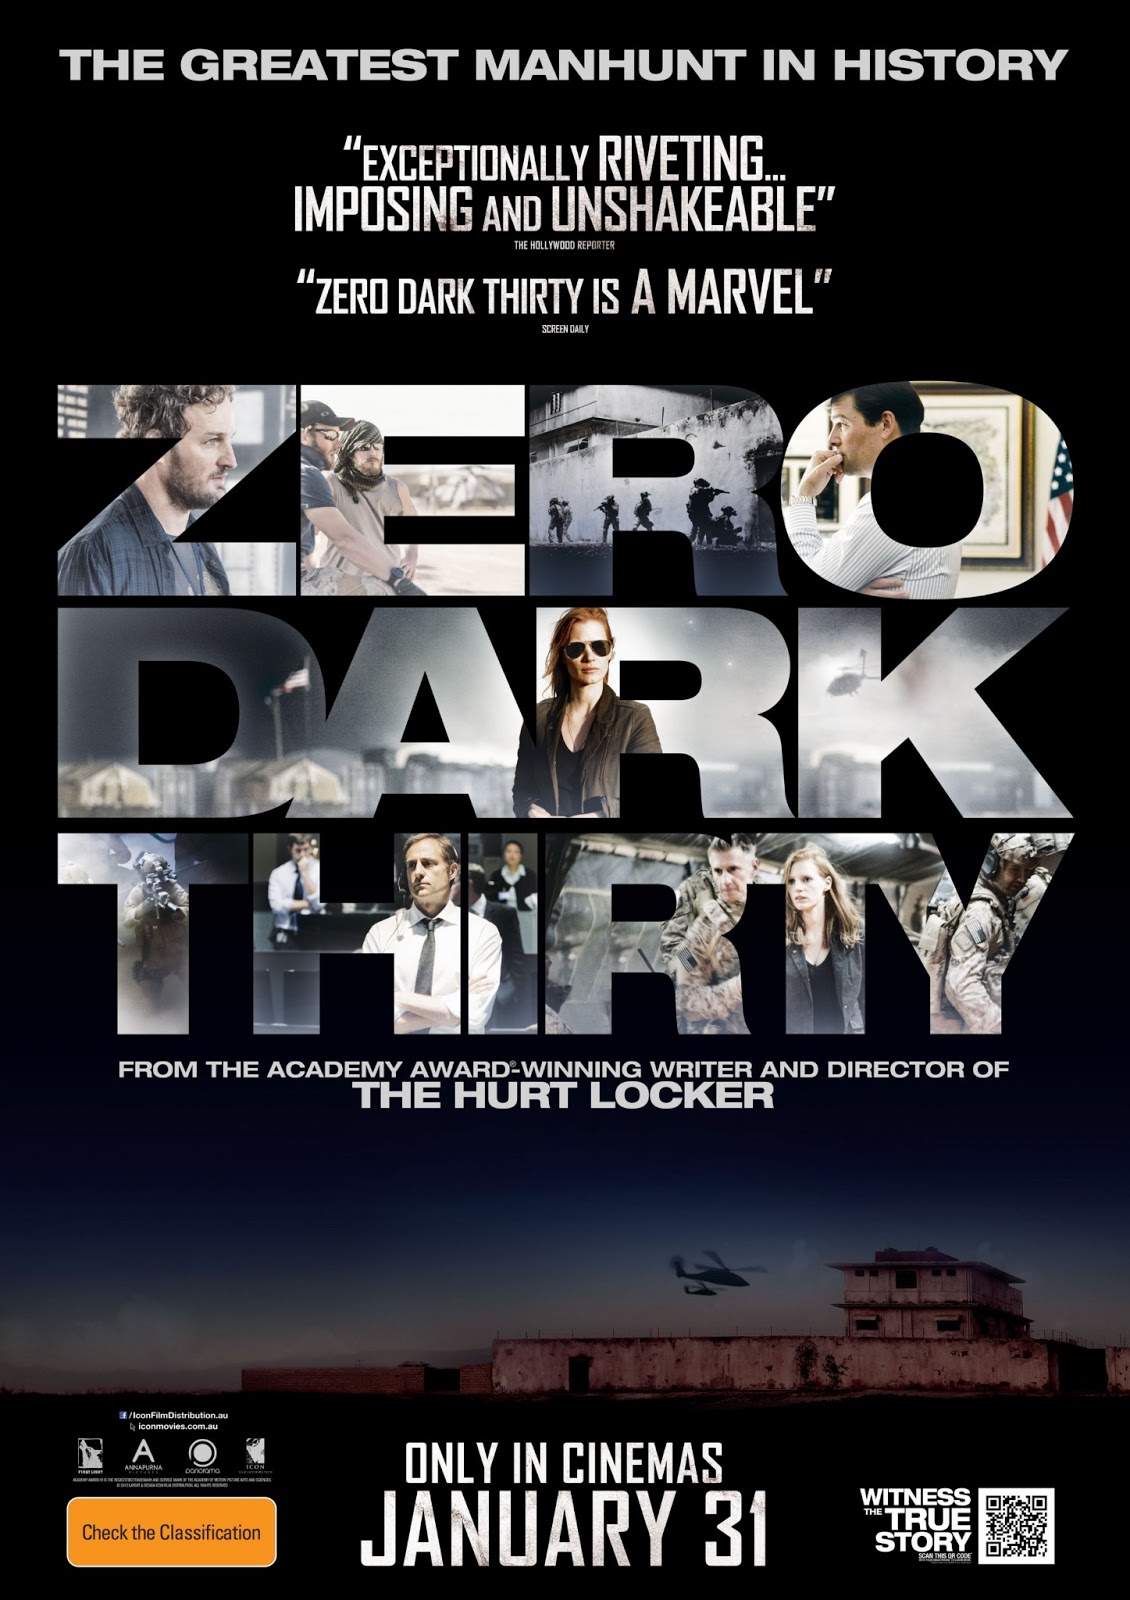 The Daily Zombies: Zero Dark Thirty: Final Preview